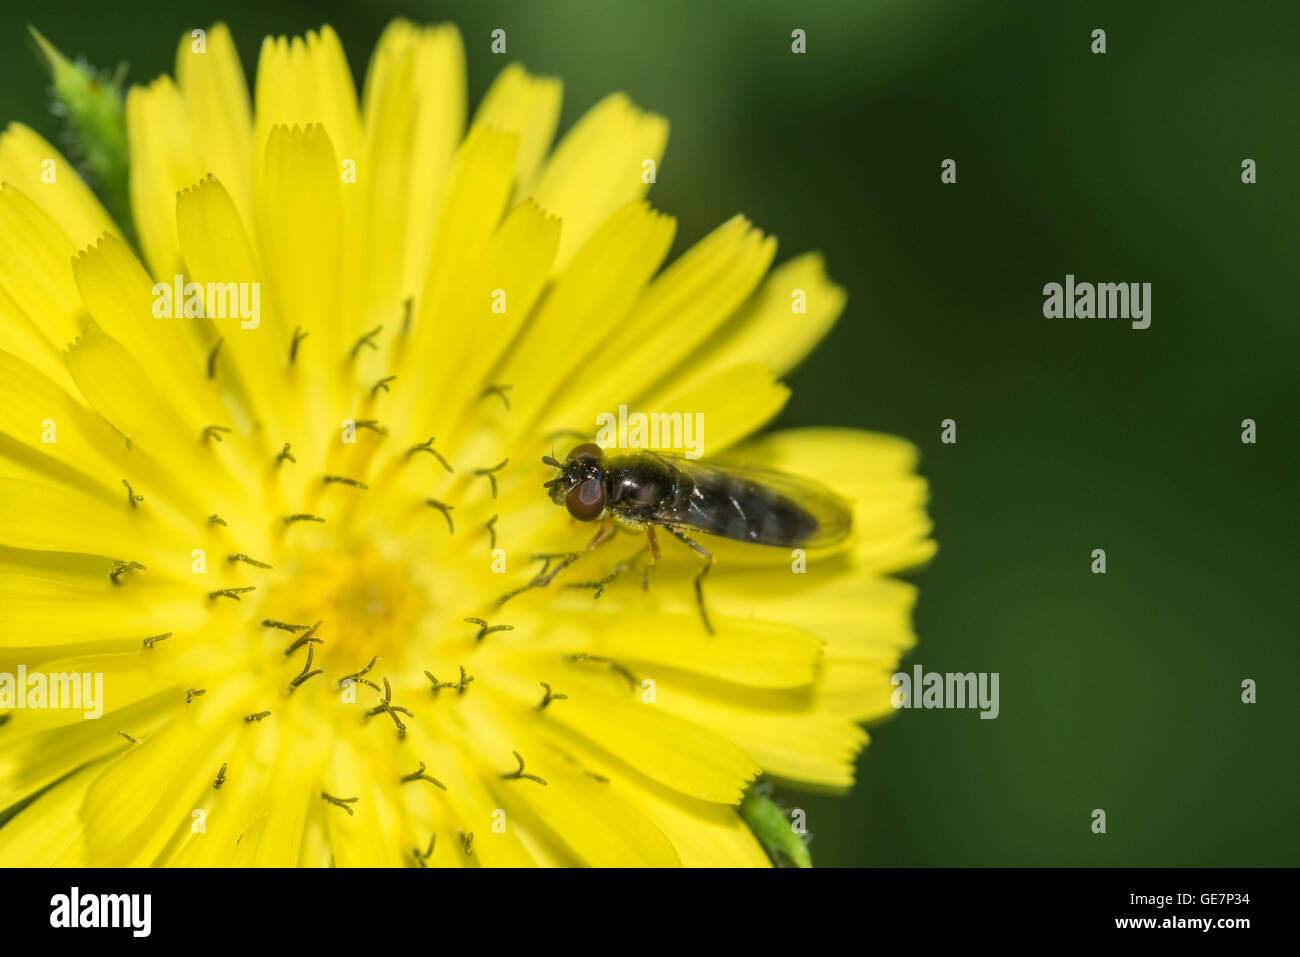 A hoverfly on a yellow flower Stock Photo